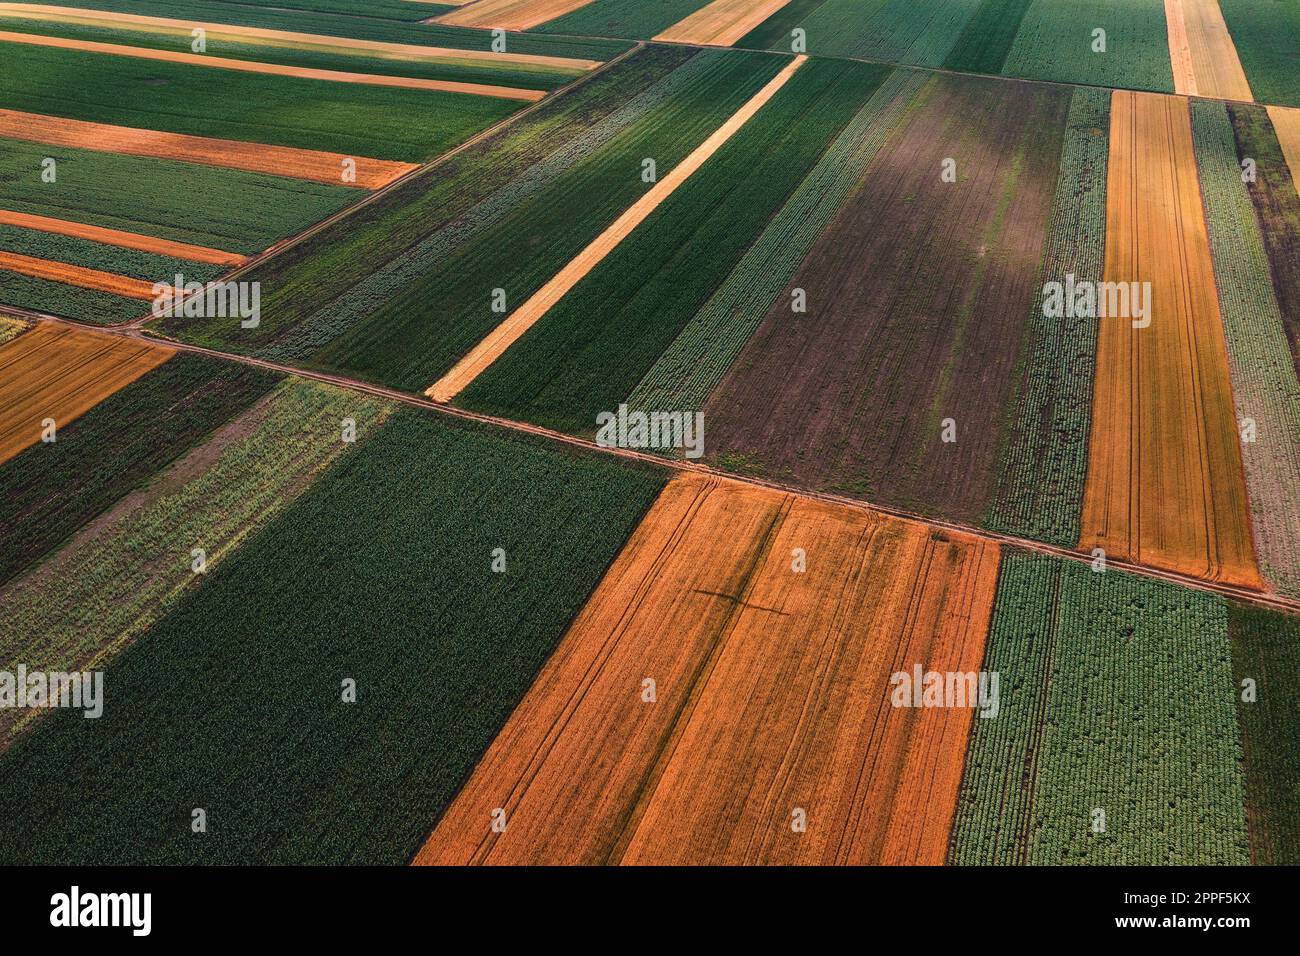 Abstract agricultural background, beautiful colorful patchwork pattern of cultivated fields from drone pov Stock Photo